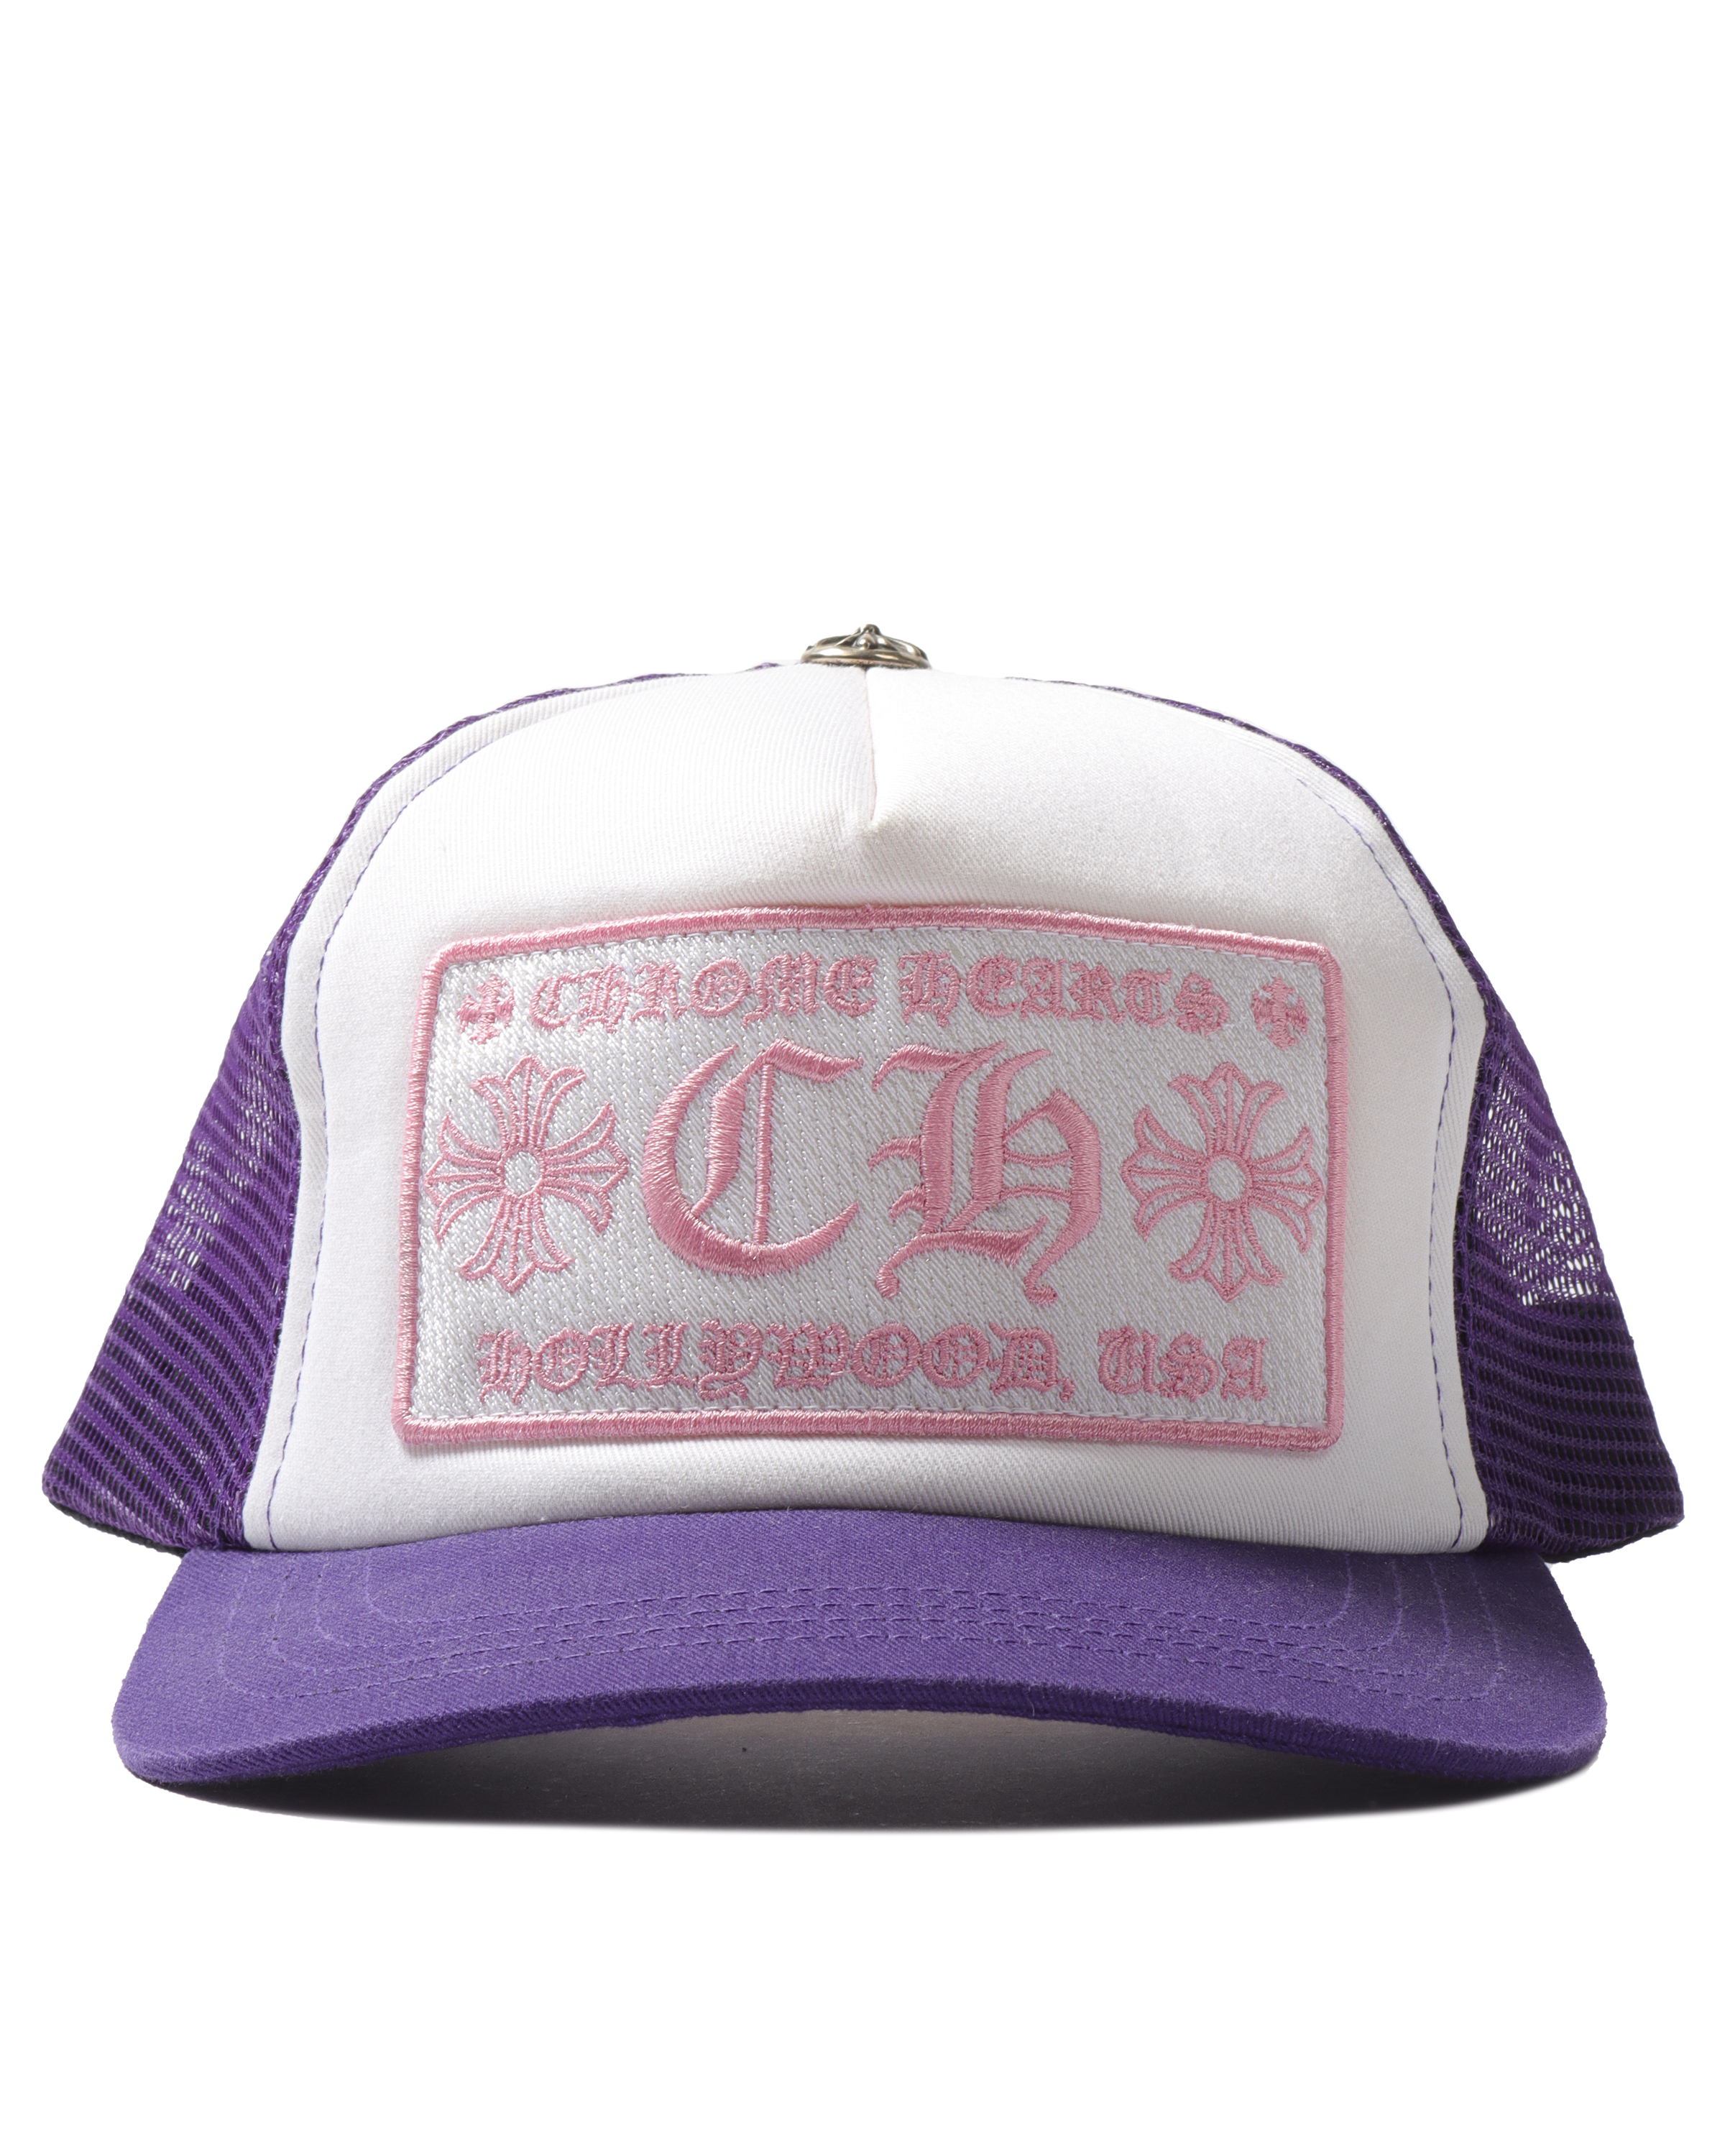 Purple and Pink Trucker Hat